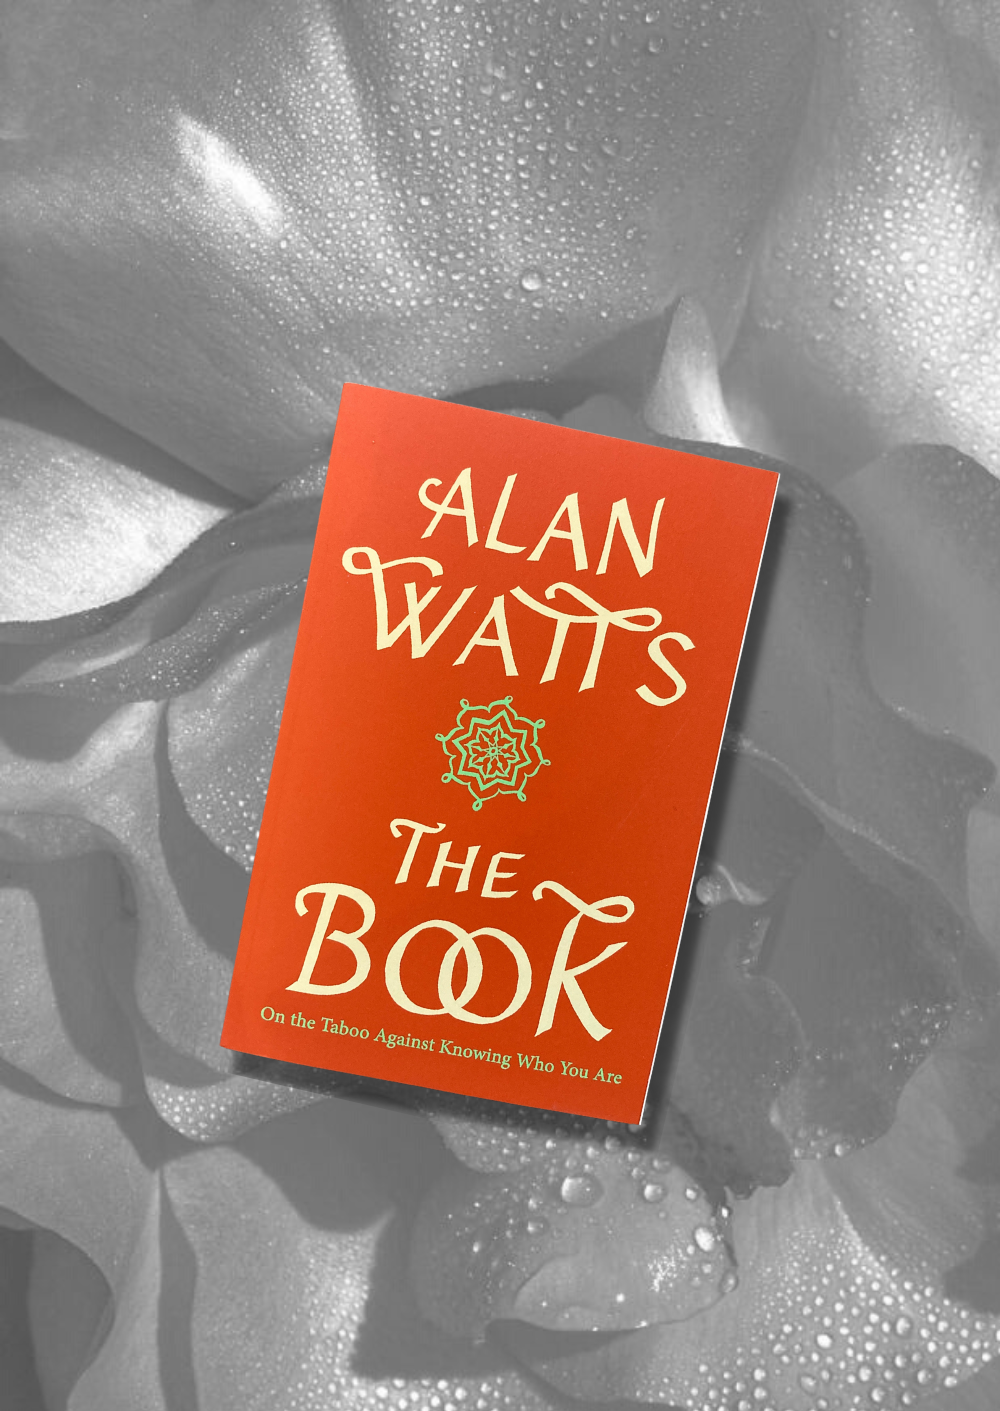 Alan Watts - The Book: On the Taboo of Knowing Who You Are